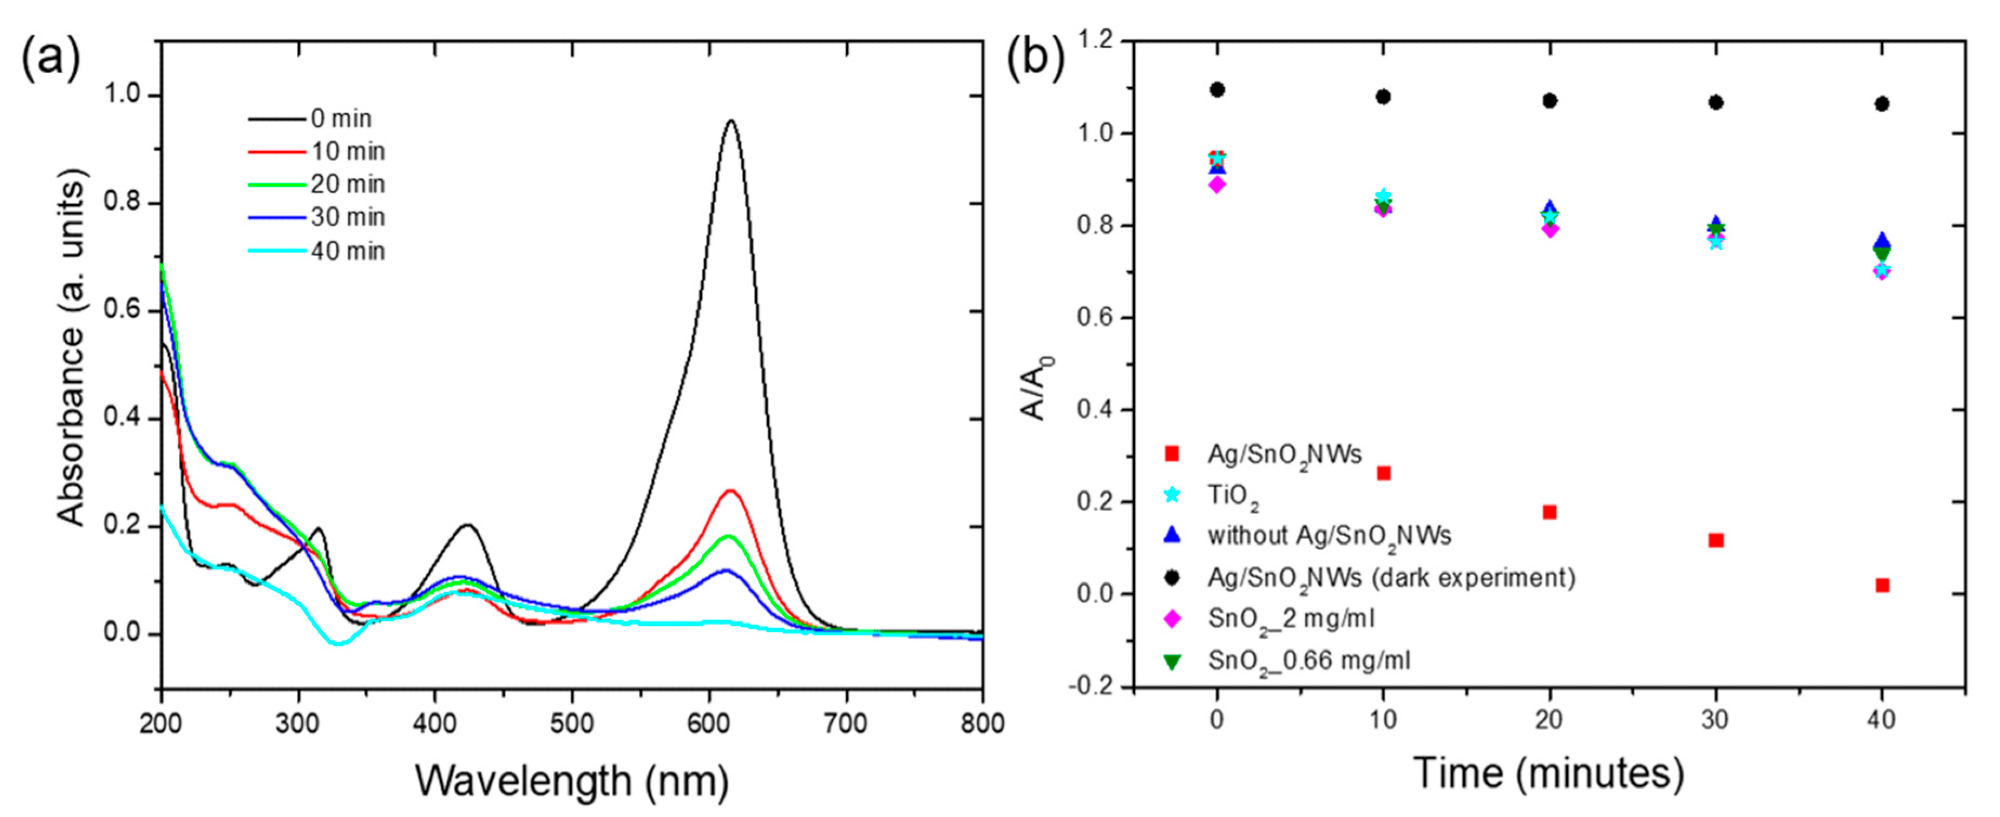 (a) The absorbance spectra of malachite green with Ag/SnO2NWs photocatalyst presence under 450 nm light irradiation. (b) The degradation of malachite green with 2 mg/mL of Ag/SnO2NWs catalyst (¦), with no photocatalyst (?), with 0.66 mg/mL of SnO2NPs (?), 2 mg/mL of SnO2NPs (?), and with 2 mg/mL TiO2 catalyst (?) under 450 nm light irradiation and Ag/SnO2NWs without irradiation (dark experiment, ?).